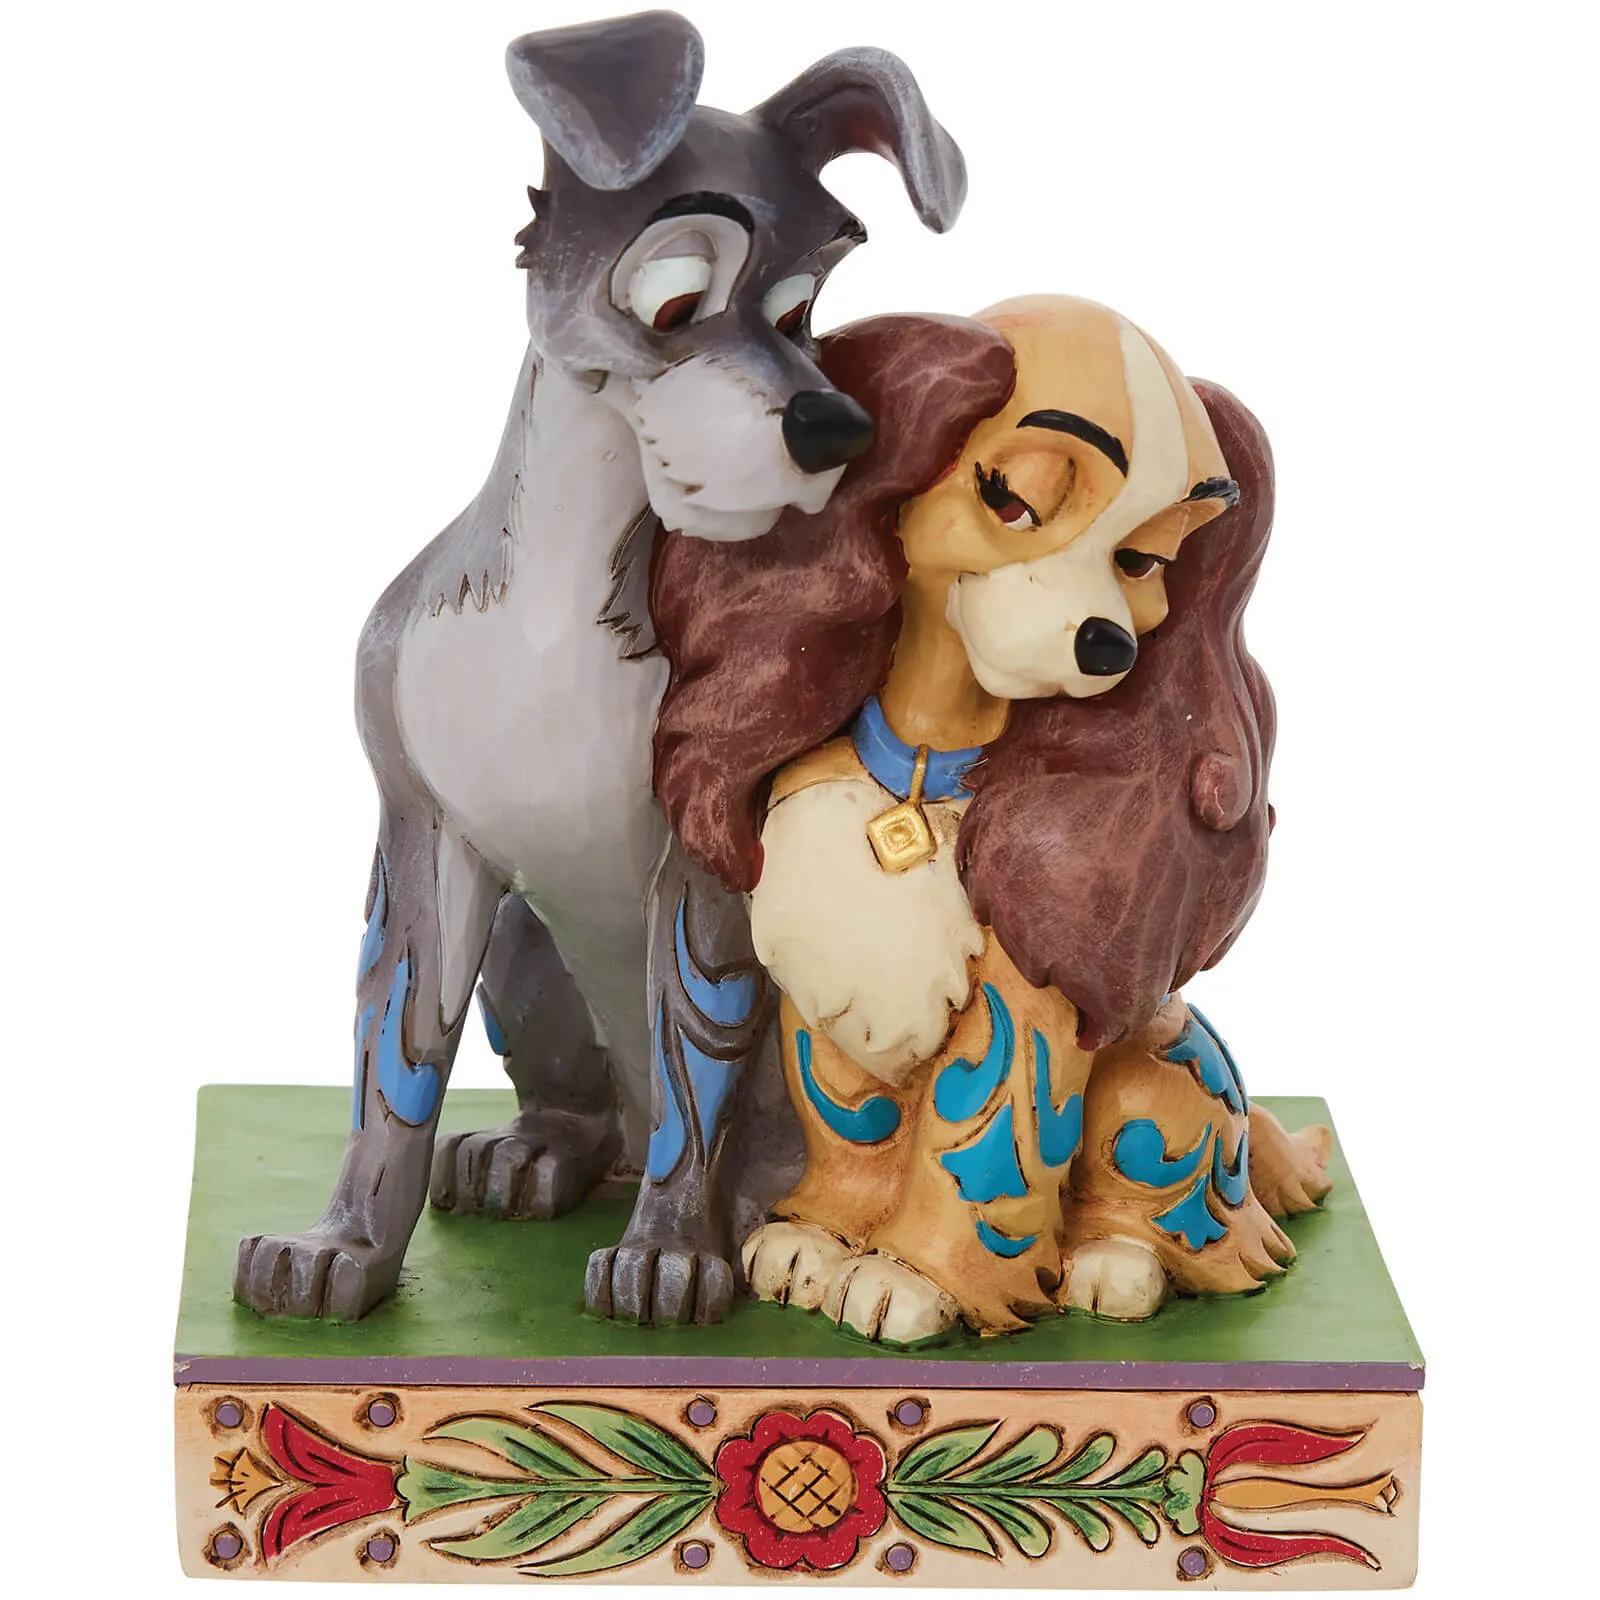  Lady and the Tramp Figurine